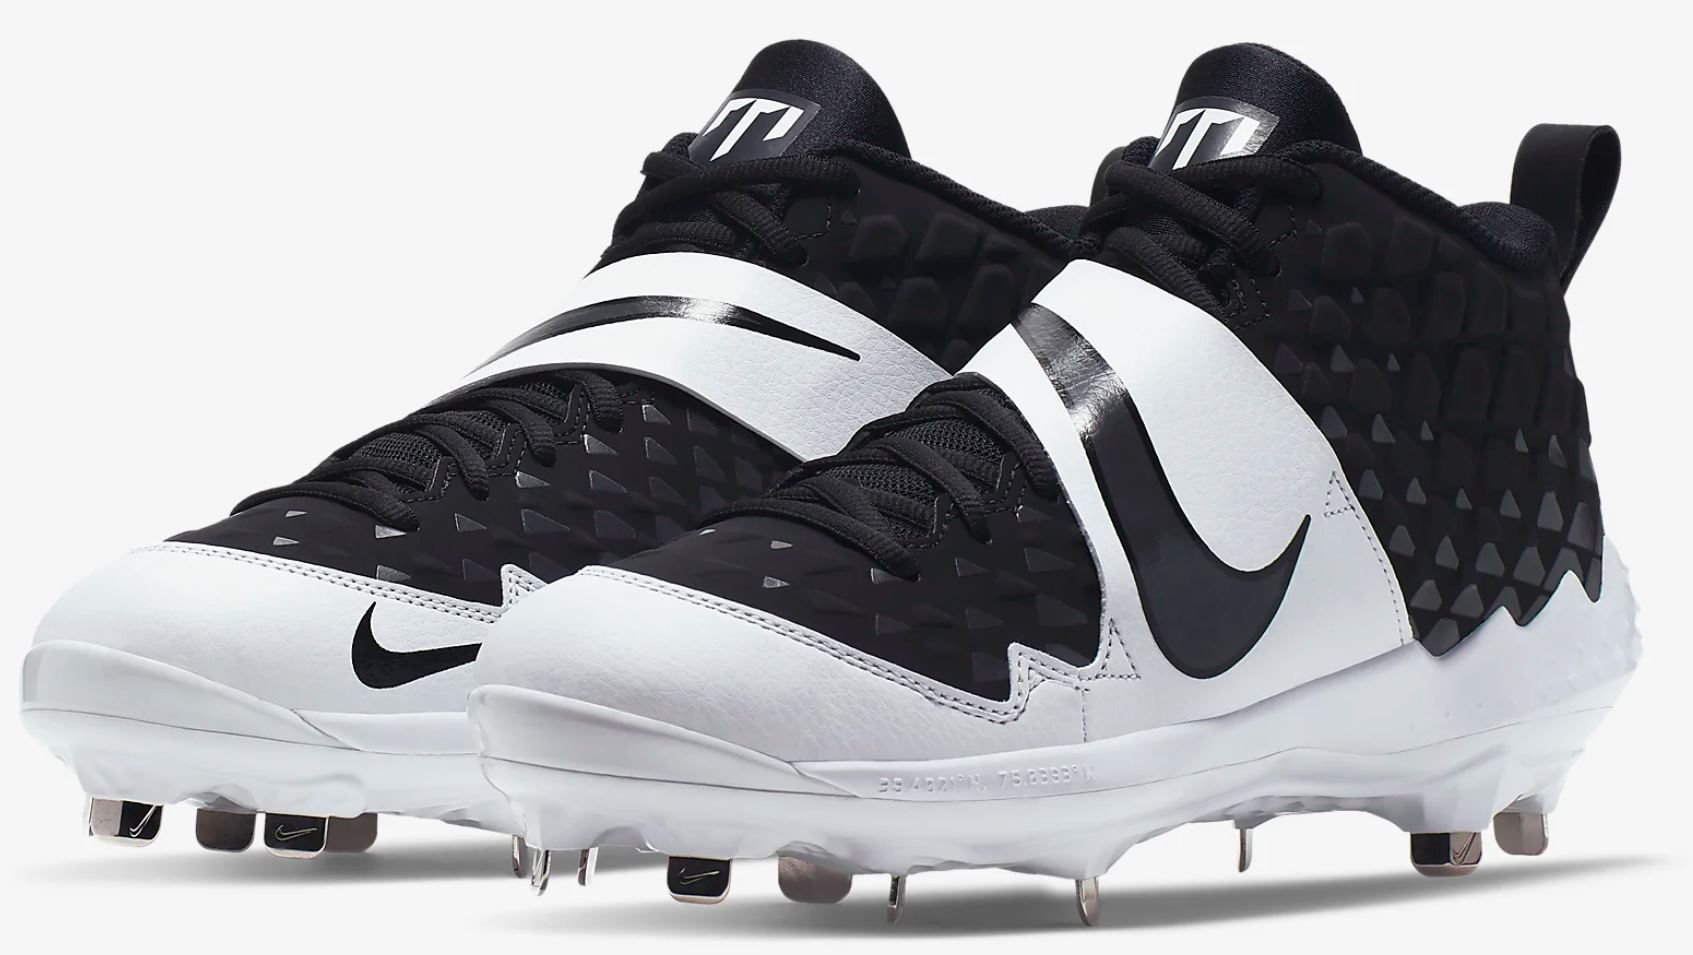 nike trout 6 metal cleats